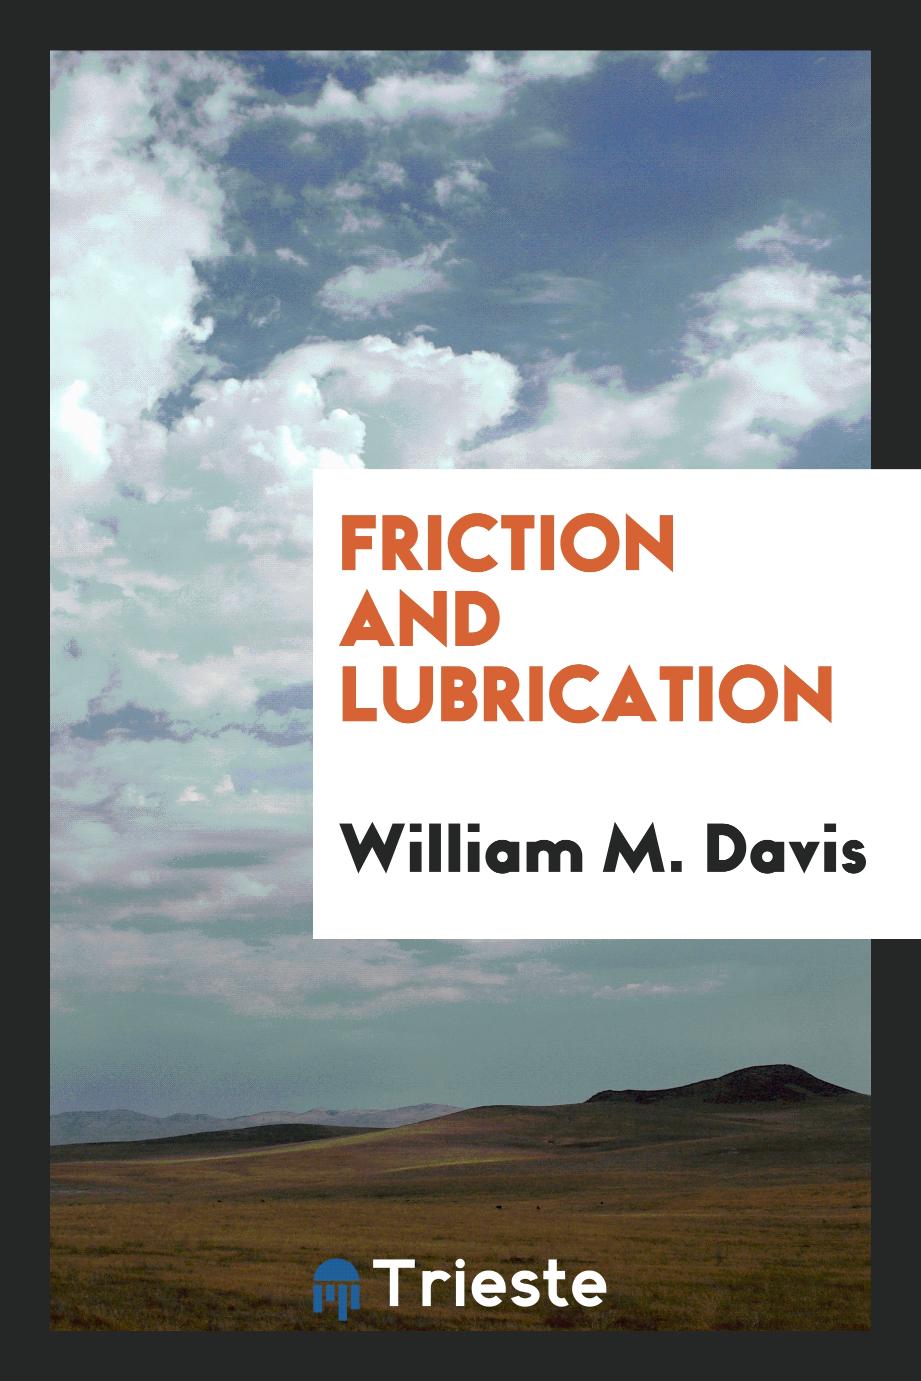 Friction and lubrication